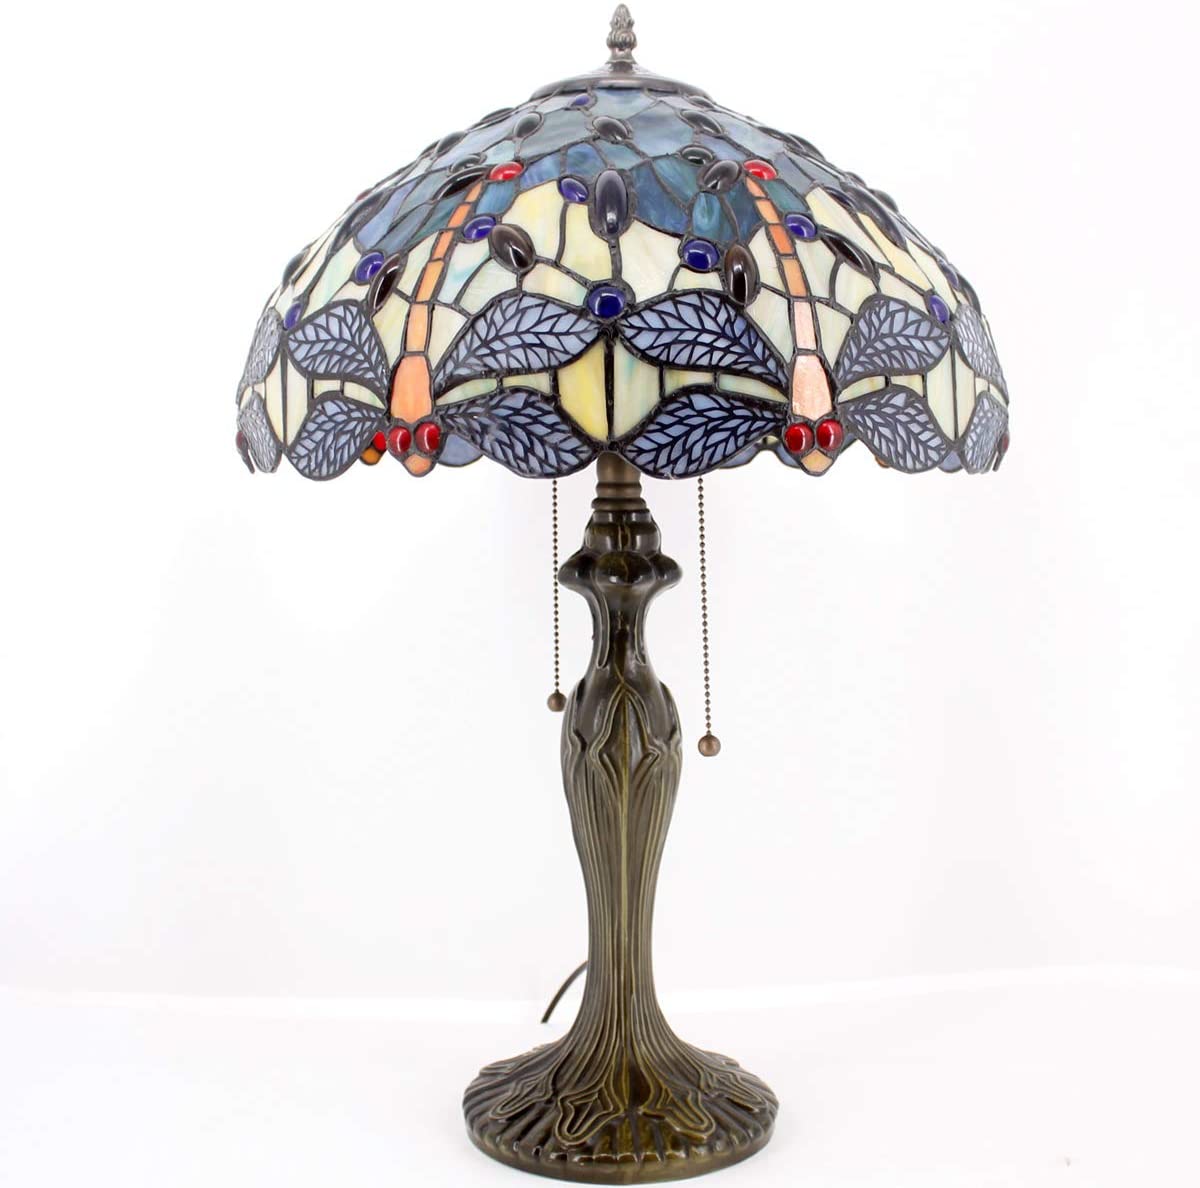 GEDUBIUBOO  Lamp Stained Glass Bedside Table Lamp Navy Blue Yellow Turquoise Dragonfly 16X16X24 Inch Desk Light Metal Base Decor Bedroom Living Room  Office S128 Series